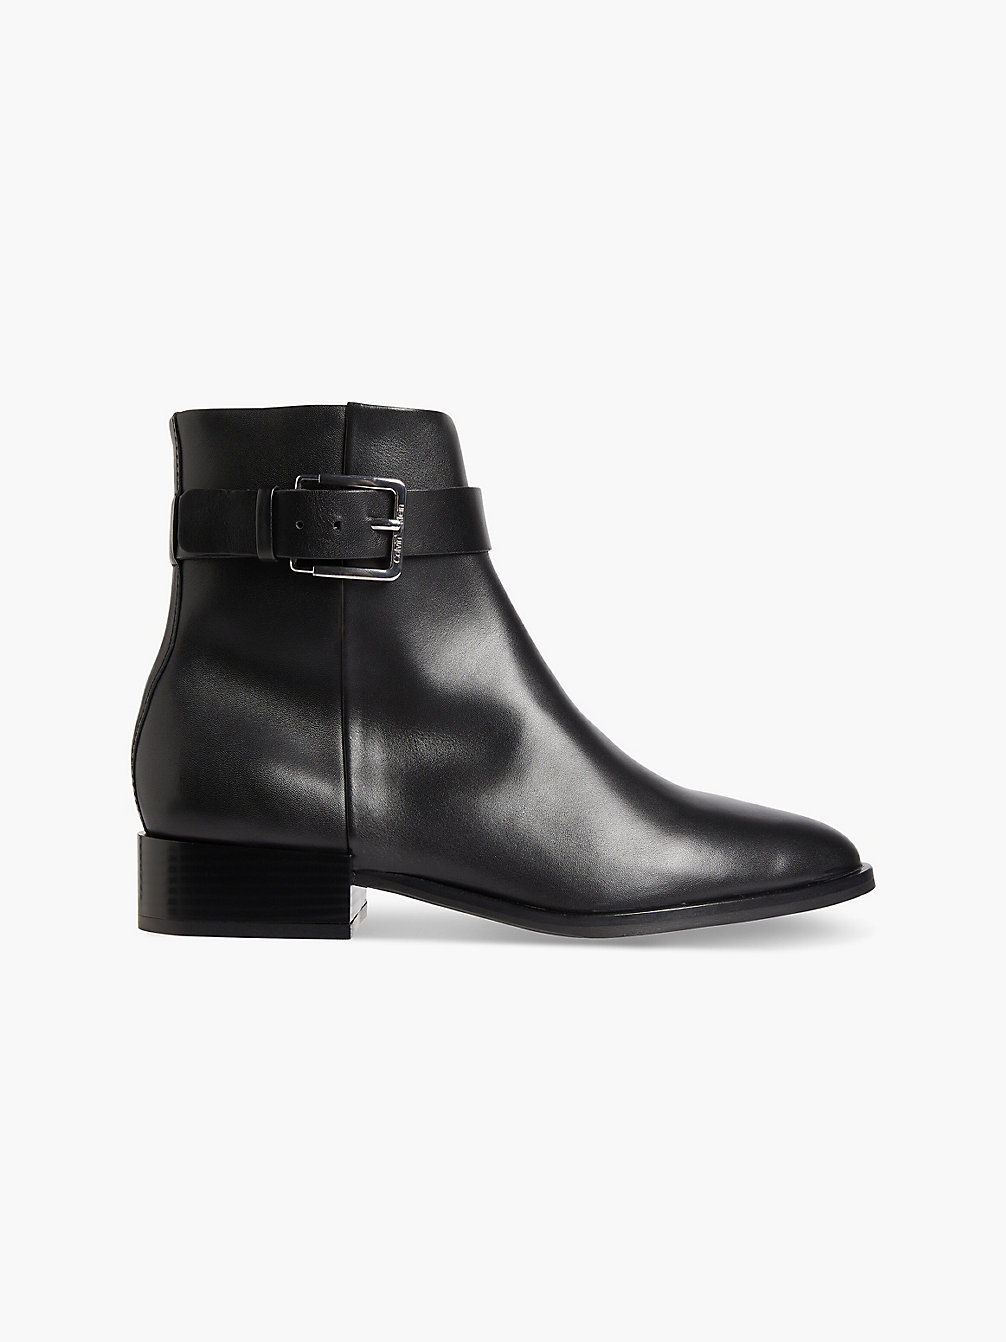 CK BLACK Leather Ankle Boots undefined women Calvin Klein